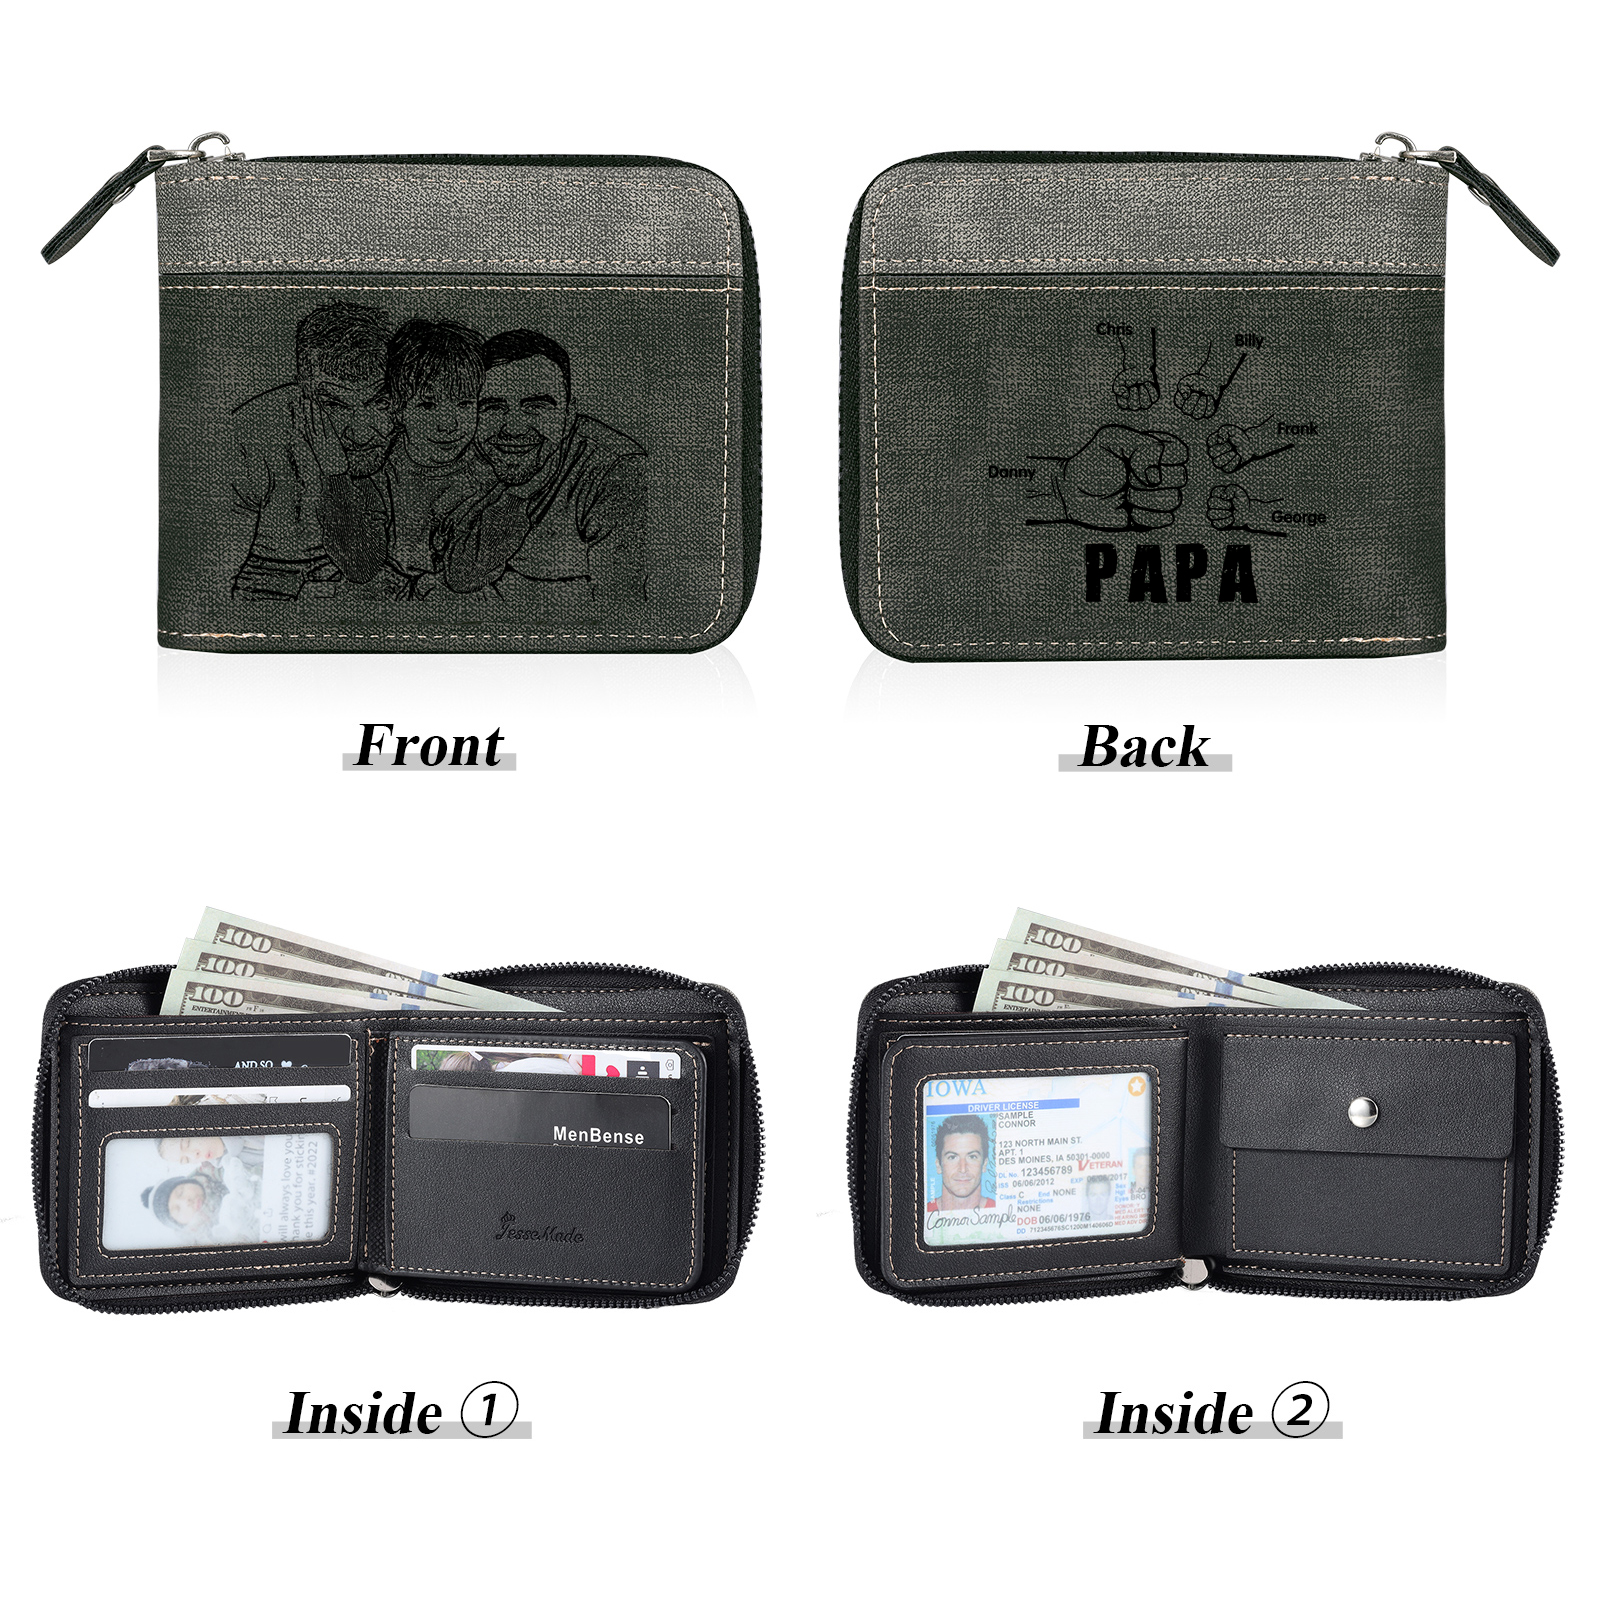 5-Names Personalized Leather Men's wallet With Card Slot Engraved With Name And Photo For Papa As a Father's Day Unique Gift